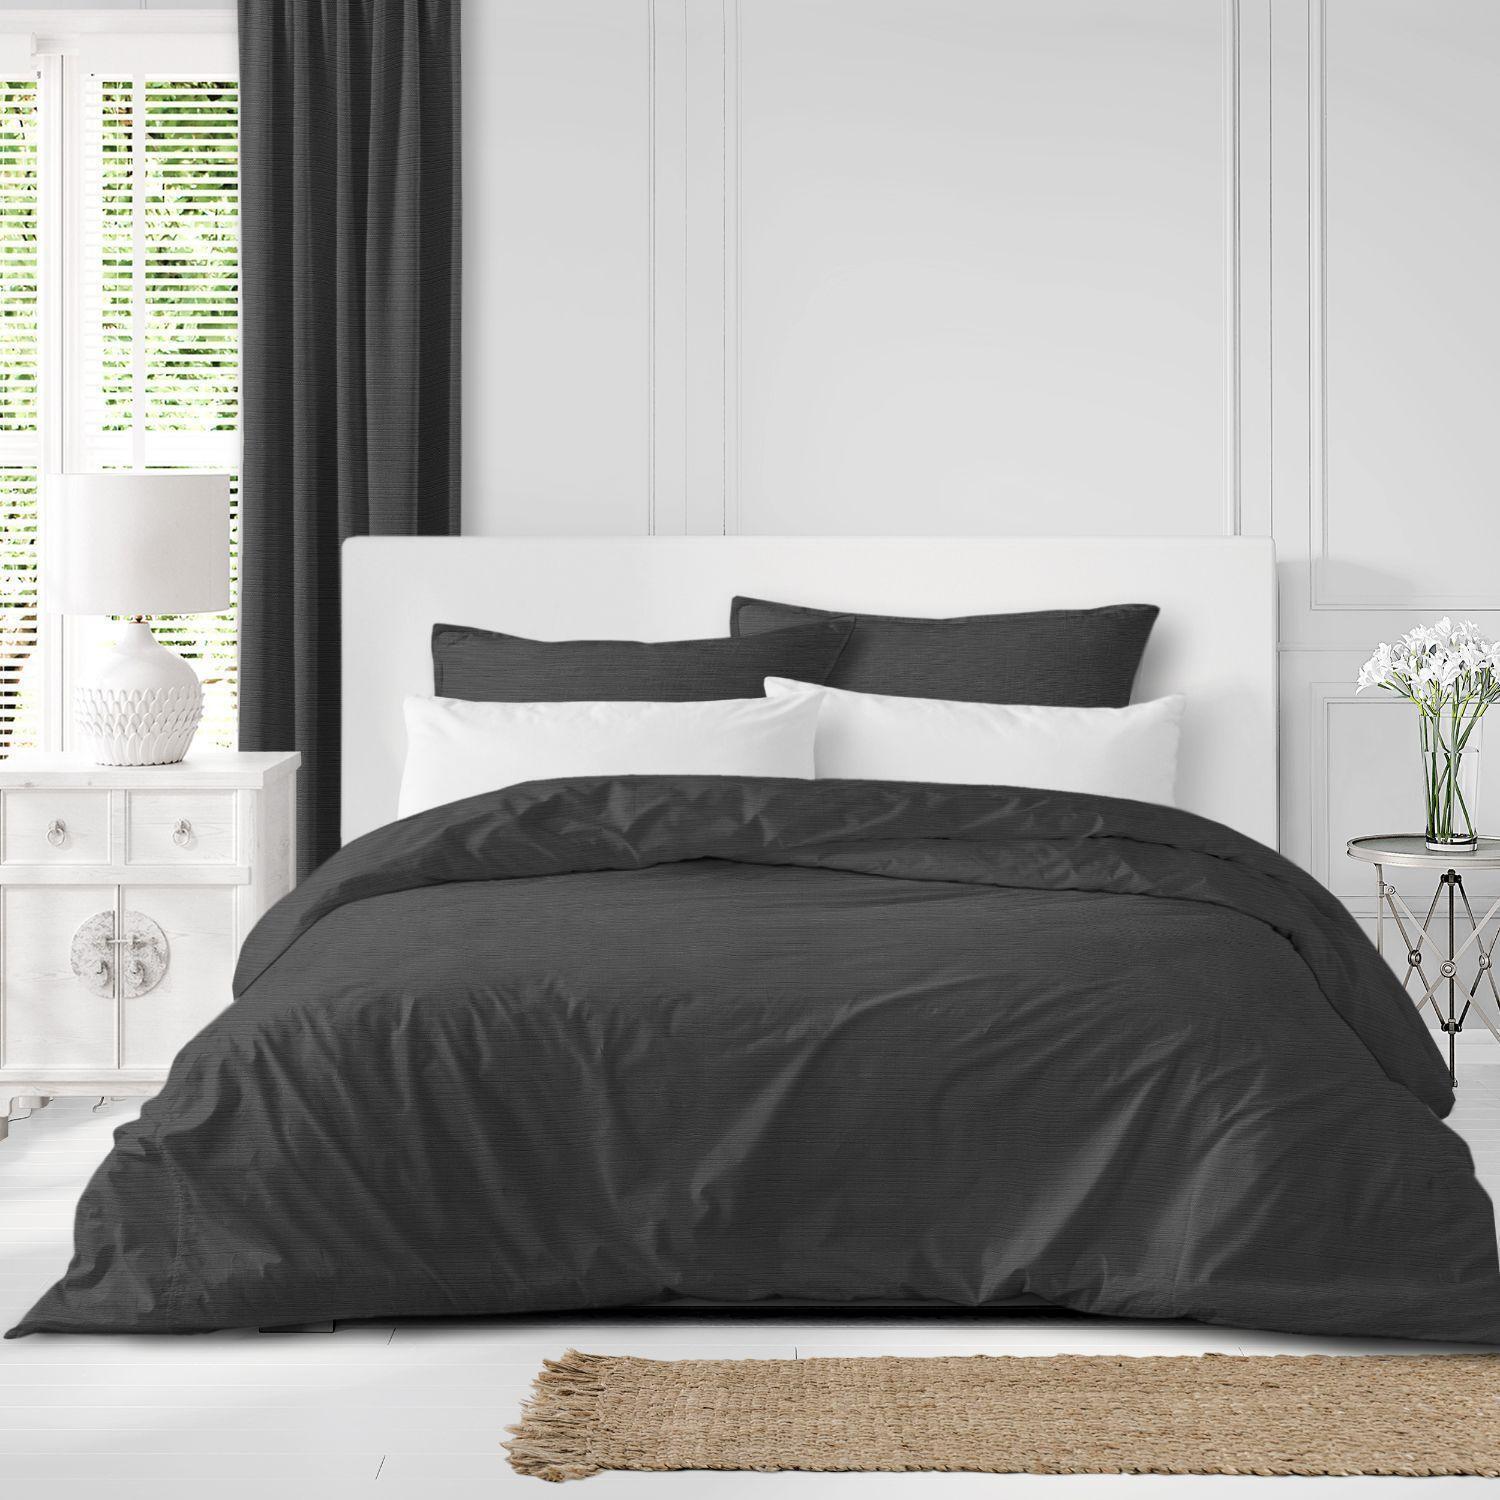 Set of 2 Charcoal Black Solid Comforter with Pillow Sham - Twin Size alternate image